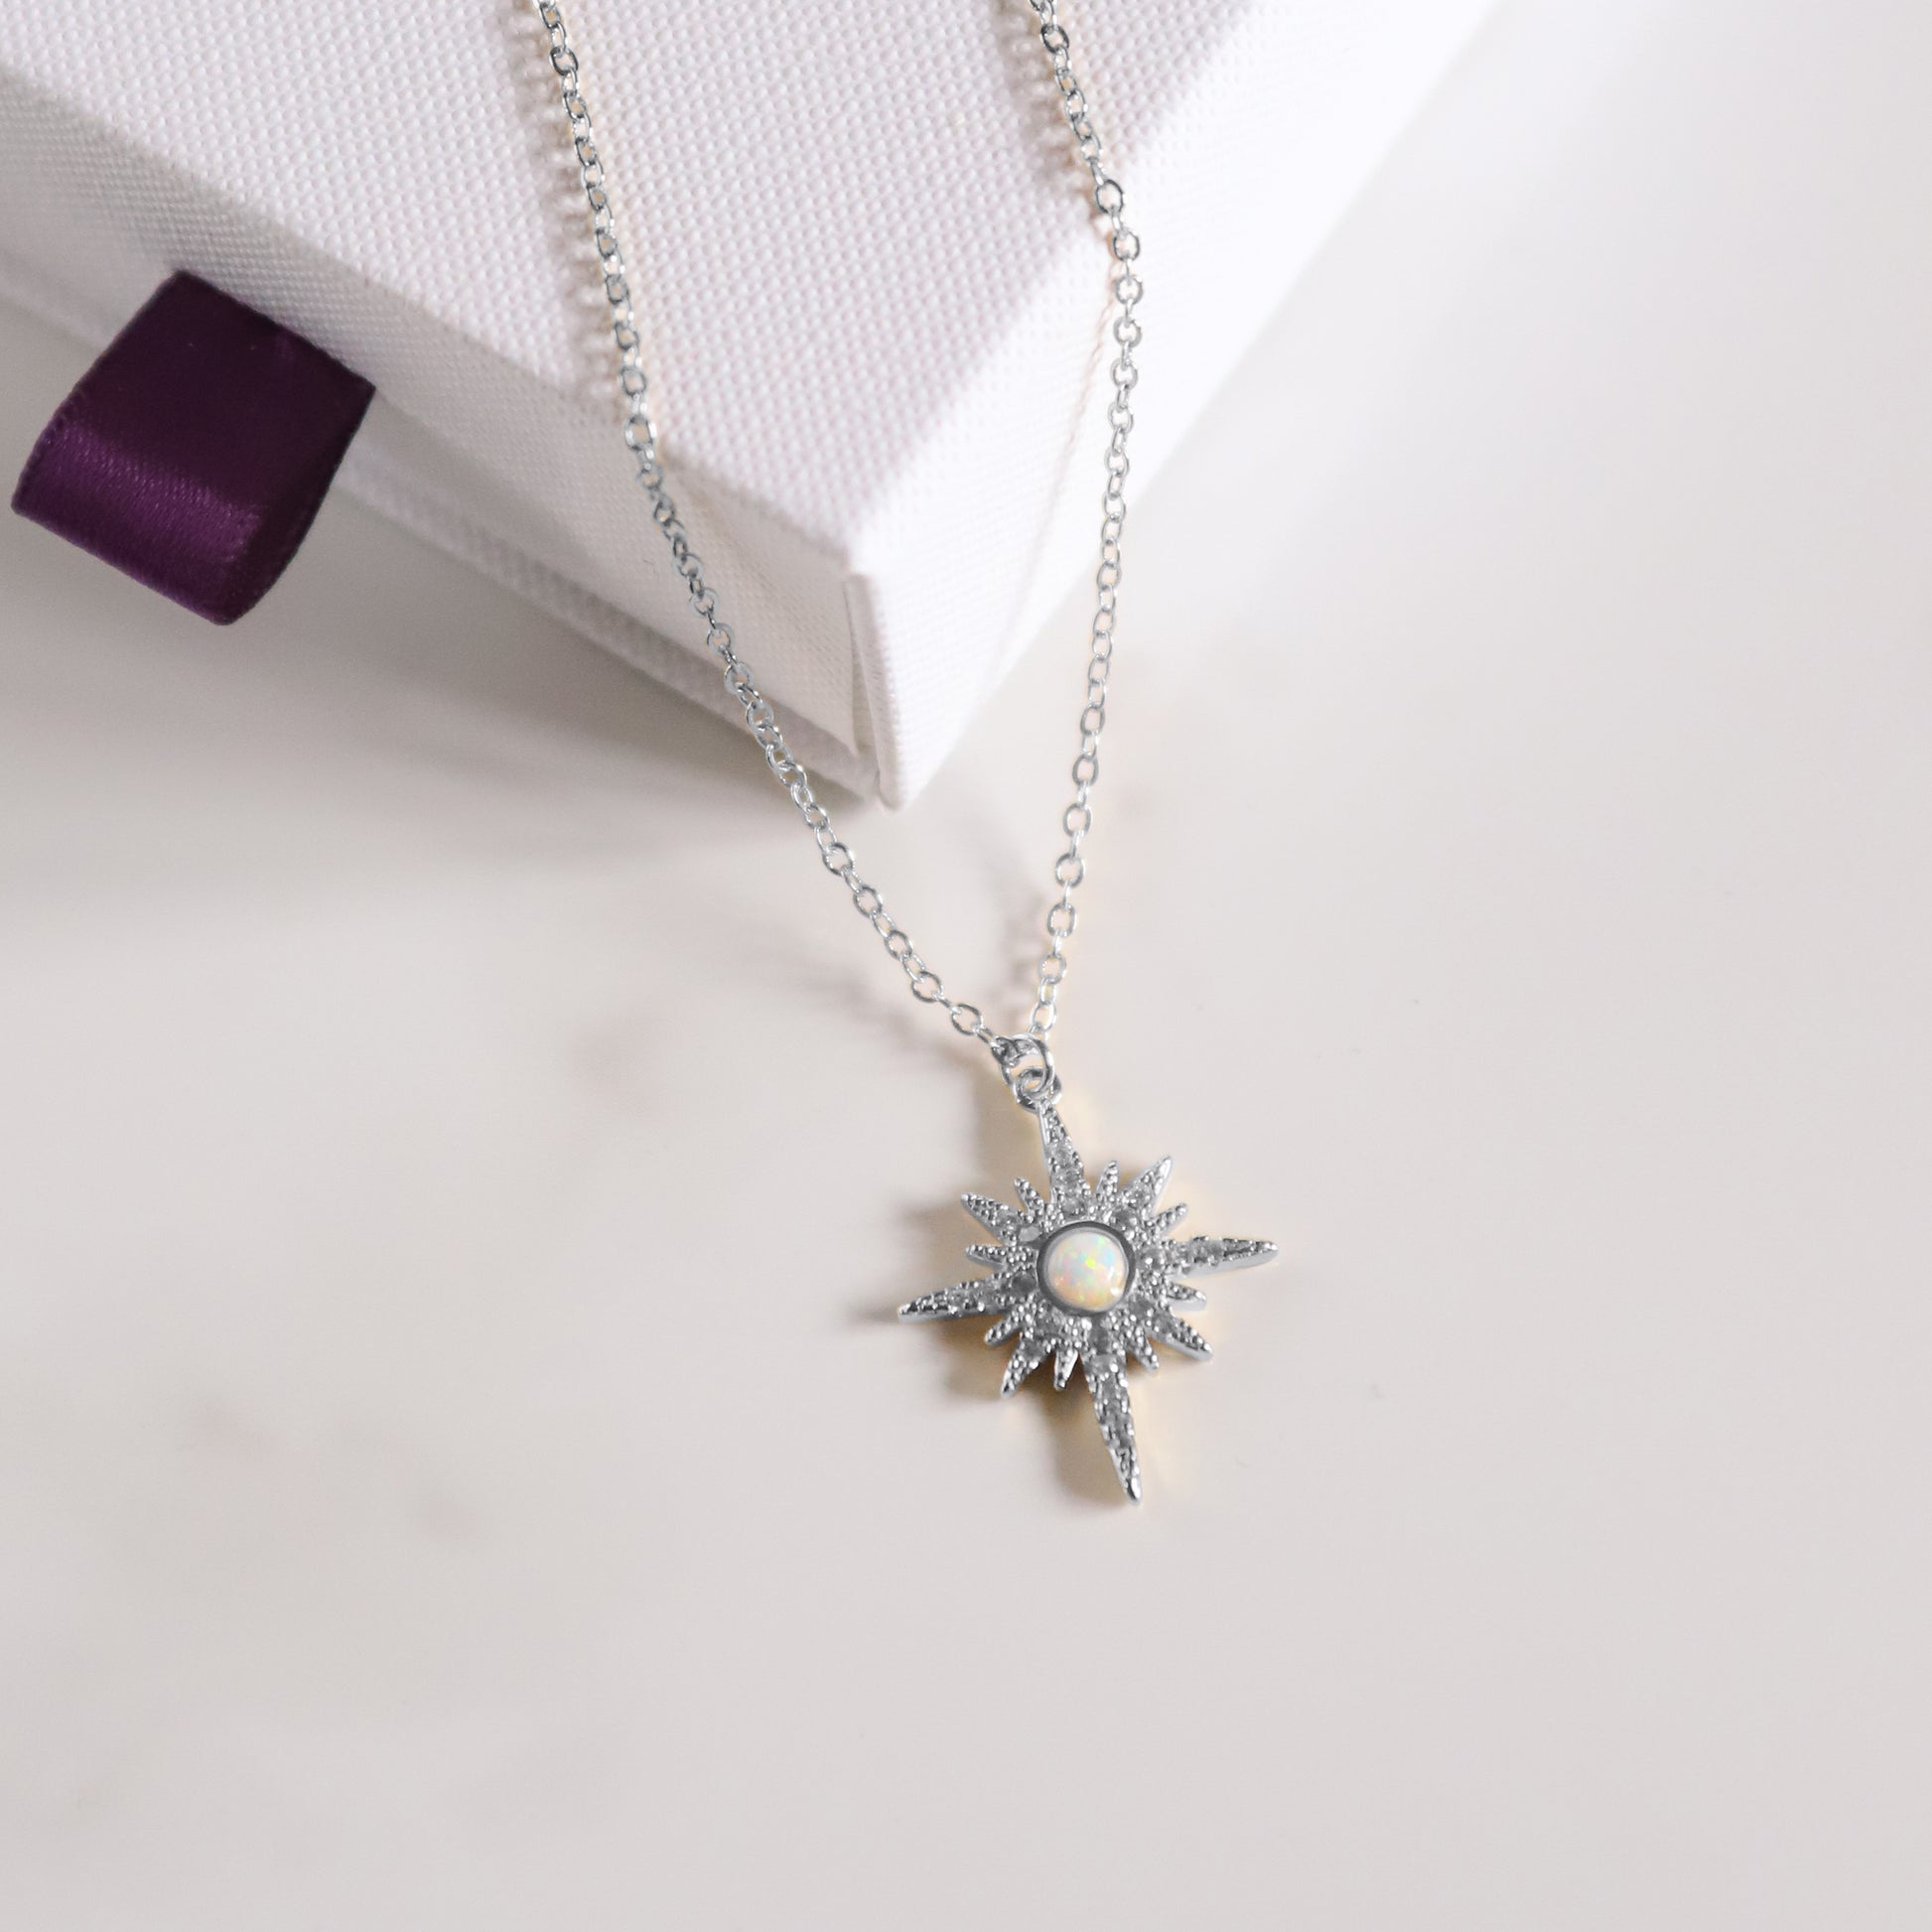 North Star Pendant Necklace | 925 Sterling Silver